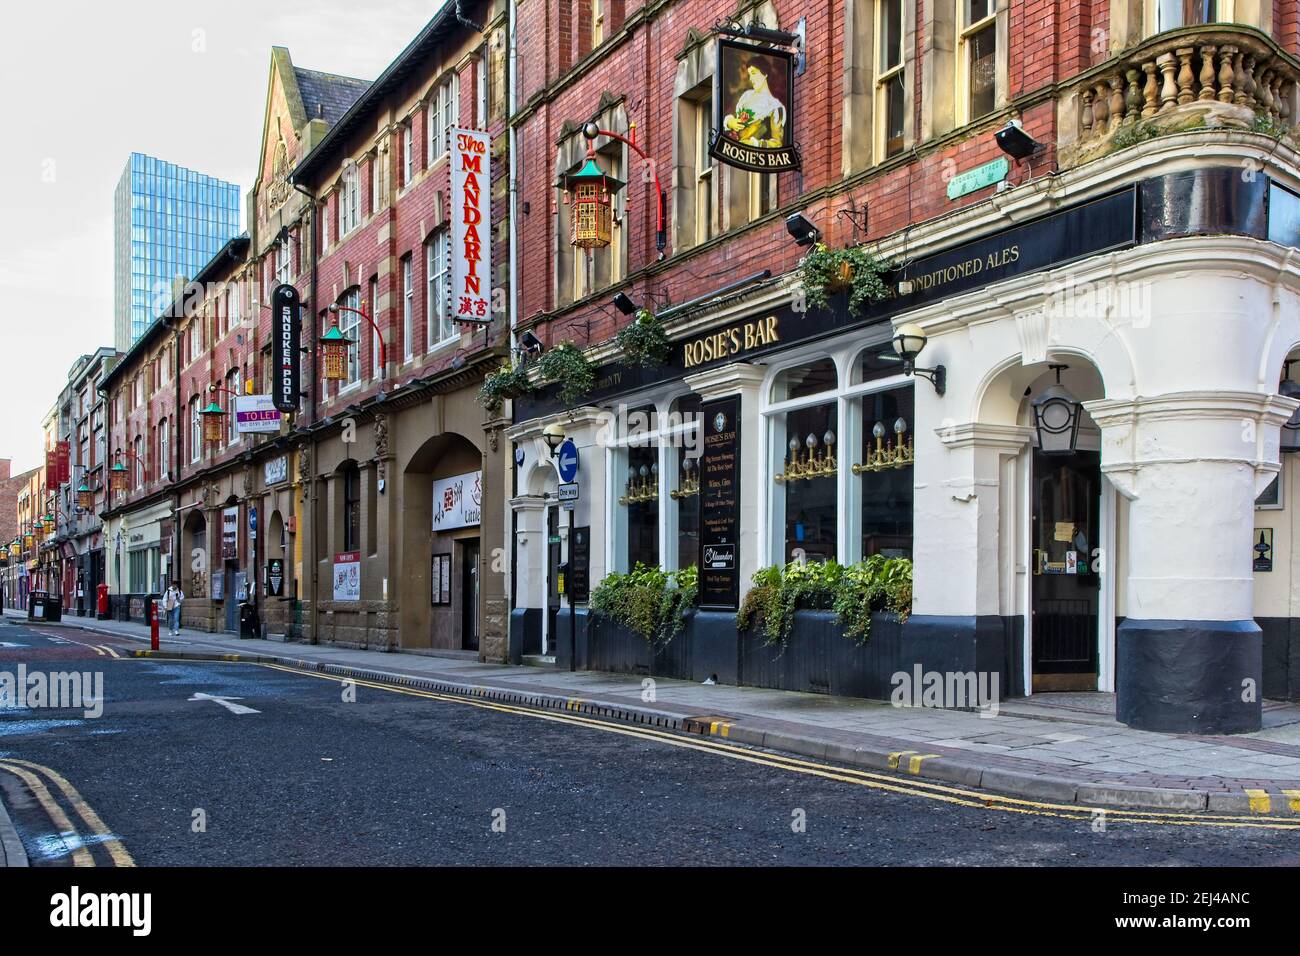 Rosie's Bar is a well know public house standing on the corner of Stowell Street in Newcastle, Tyne and Wear. Stock Photo